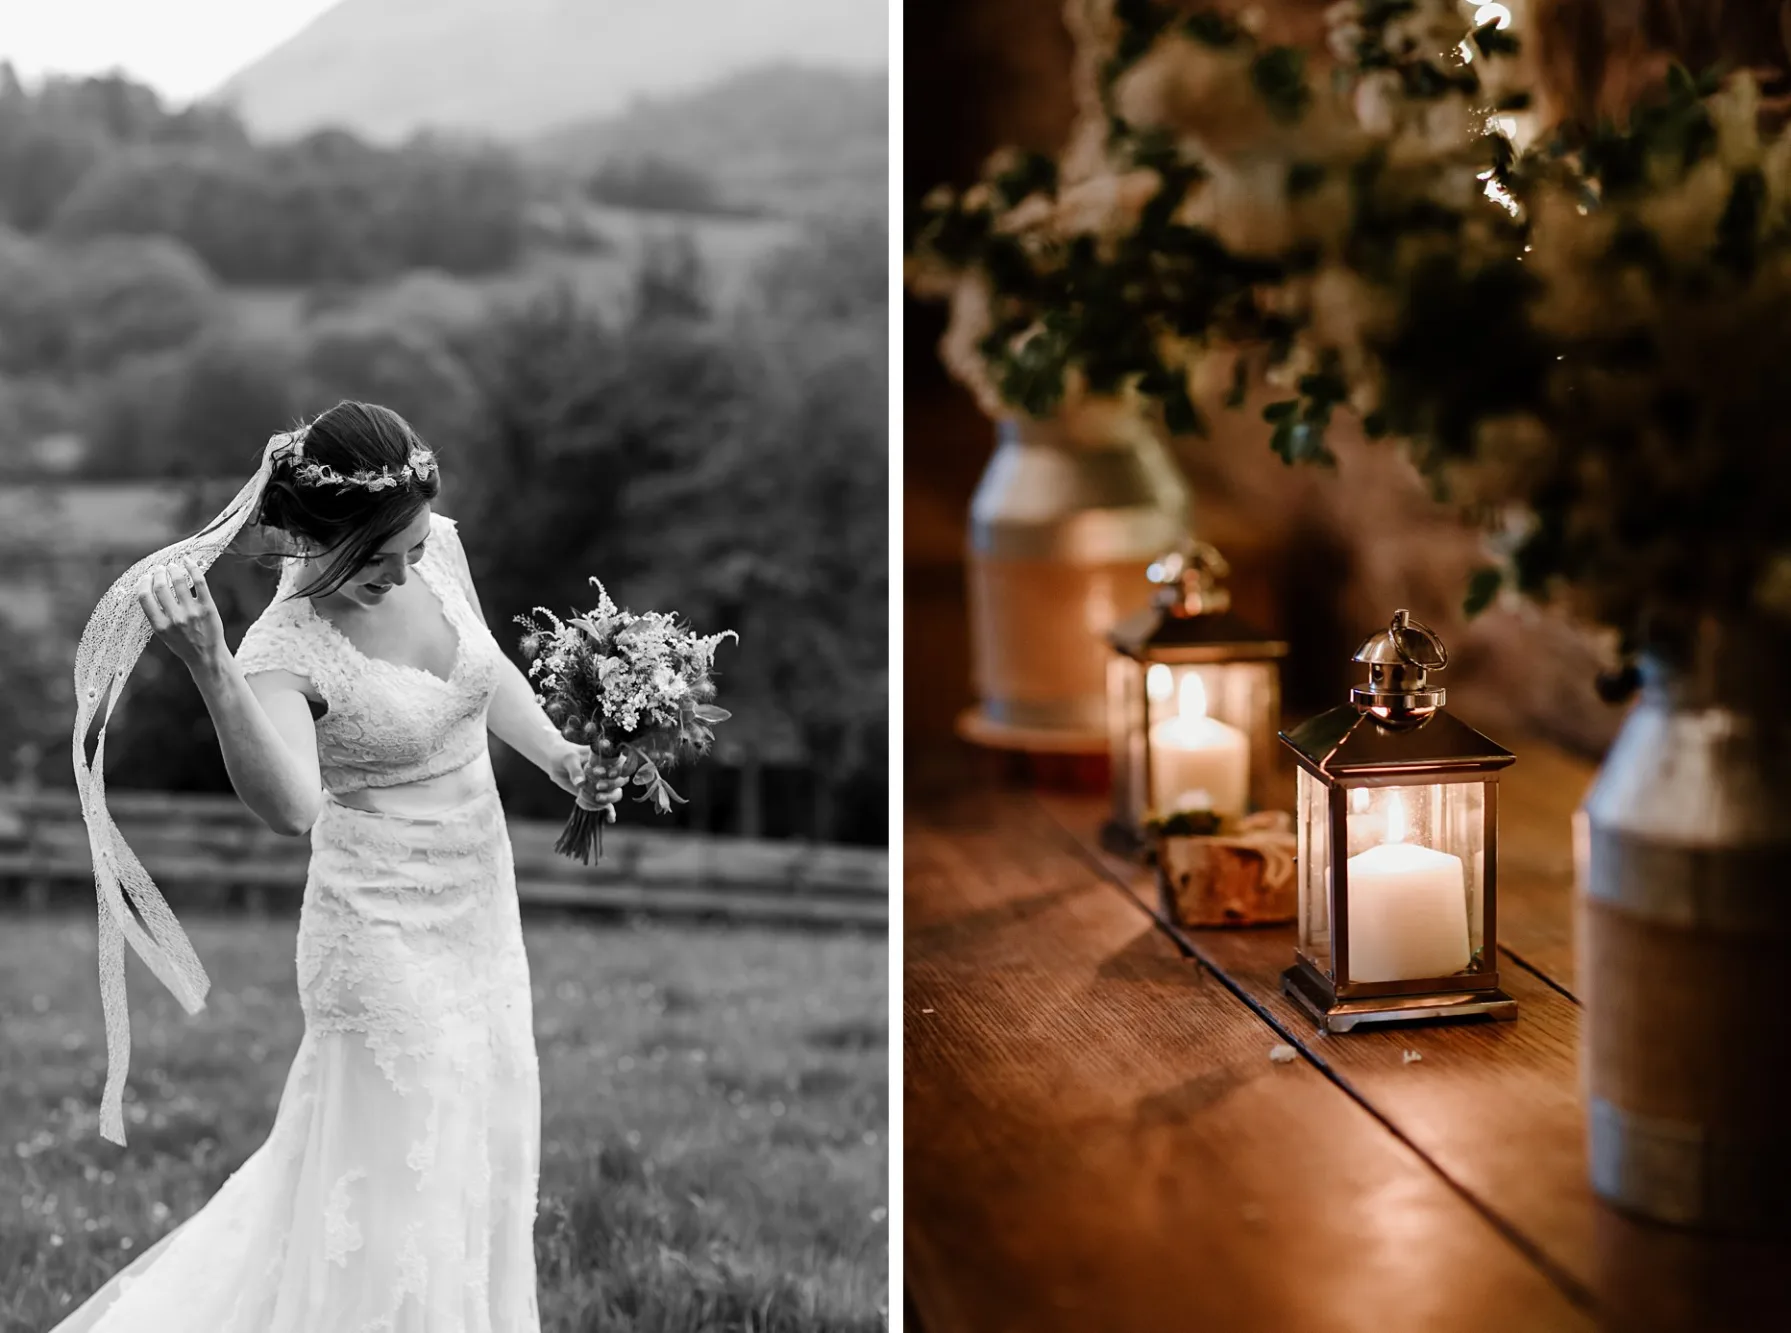 First image: Brides veil blowing in the wind. Second image: Two candles in silver lanterns 